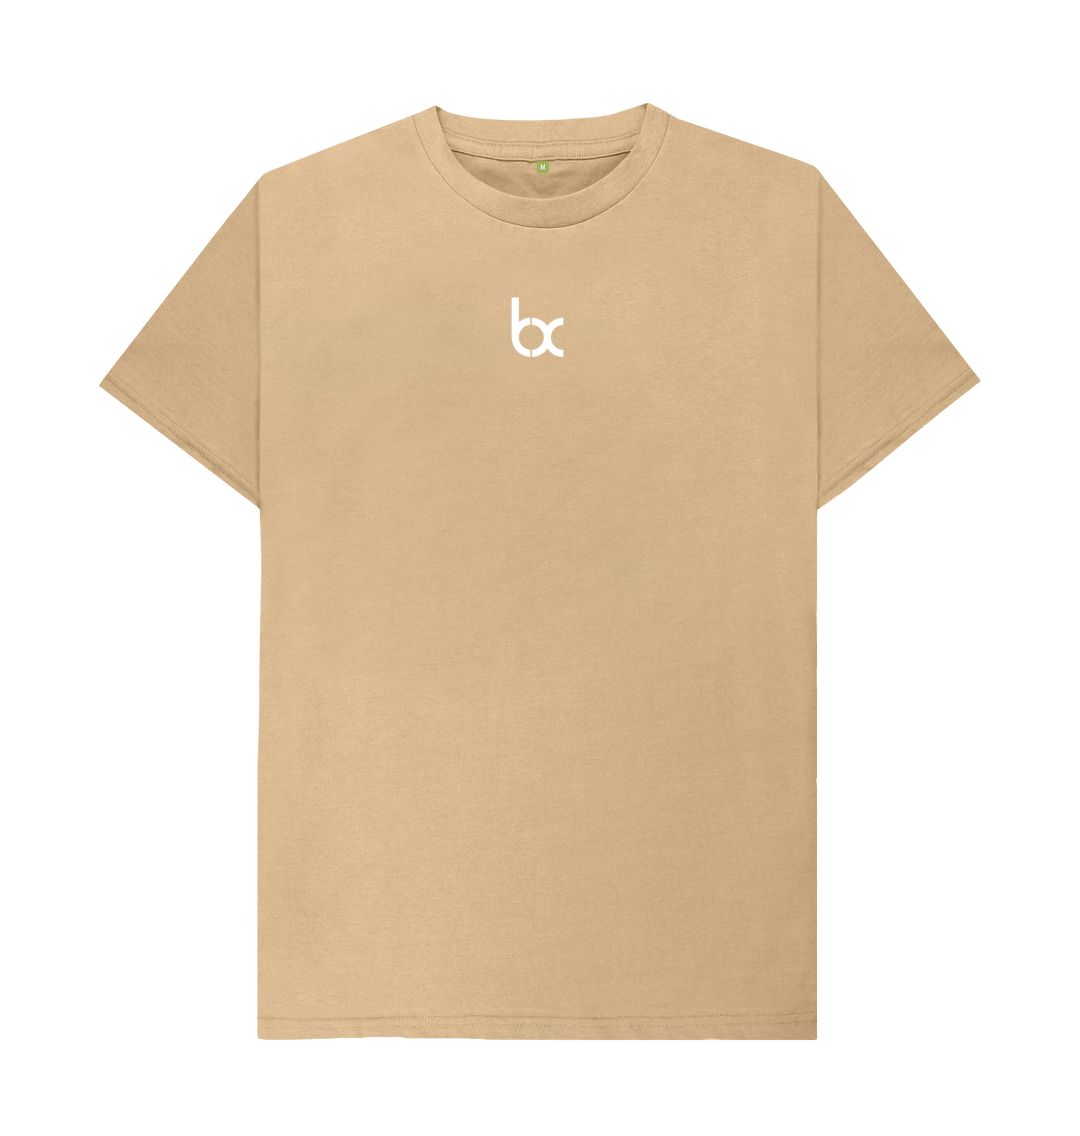 Sand BX Standard Tee with white logo